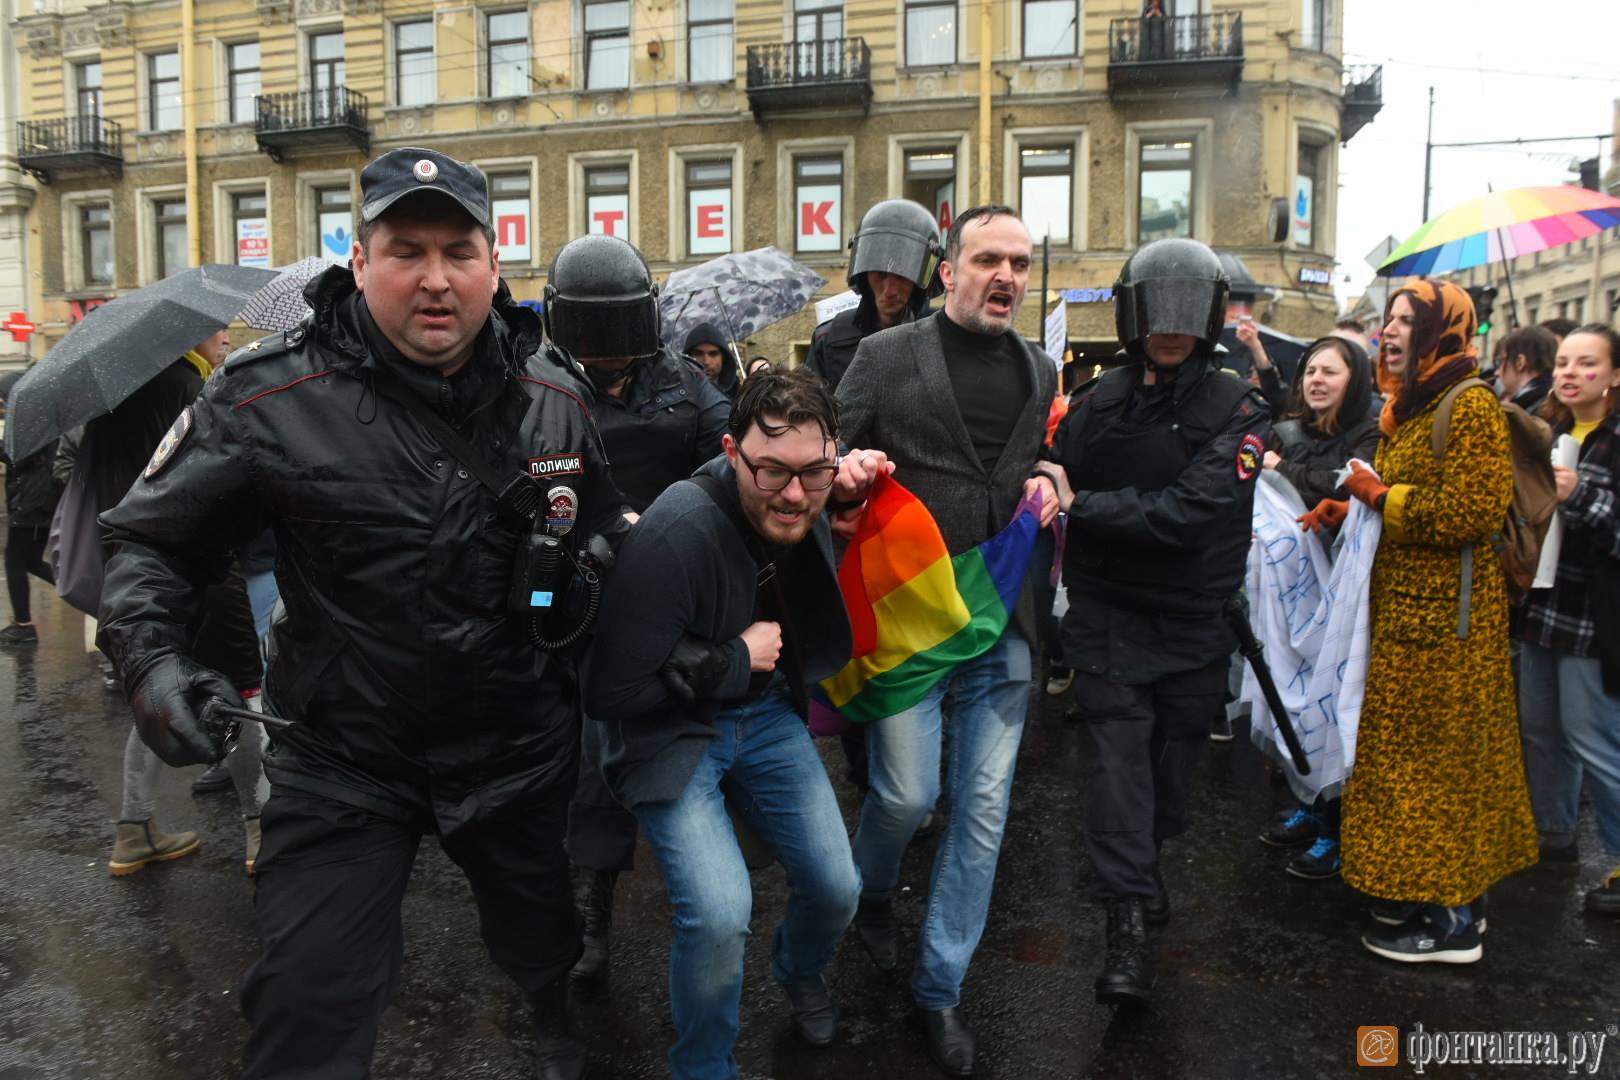 Russian court dissolves LGBTQ rights group